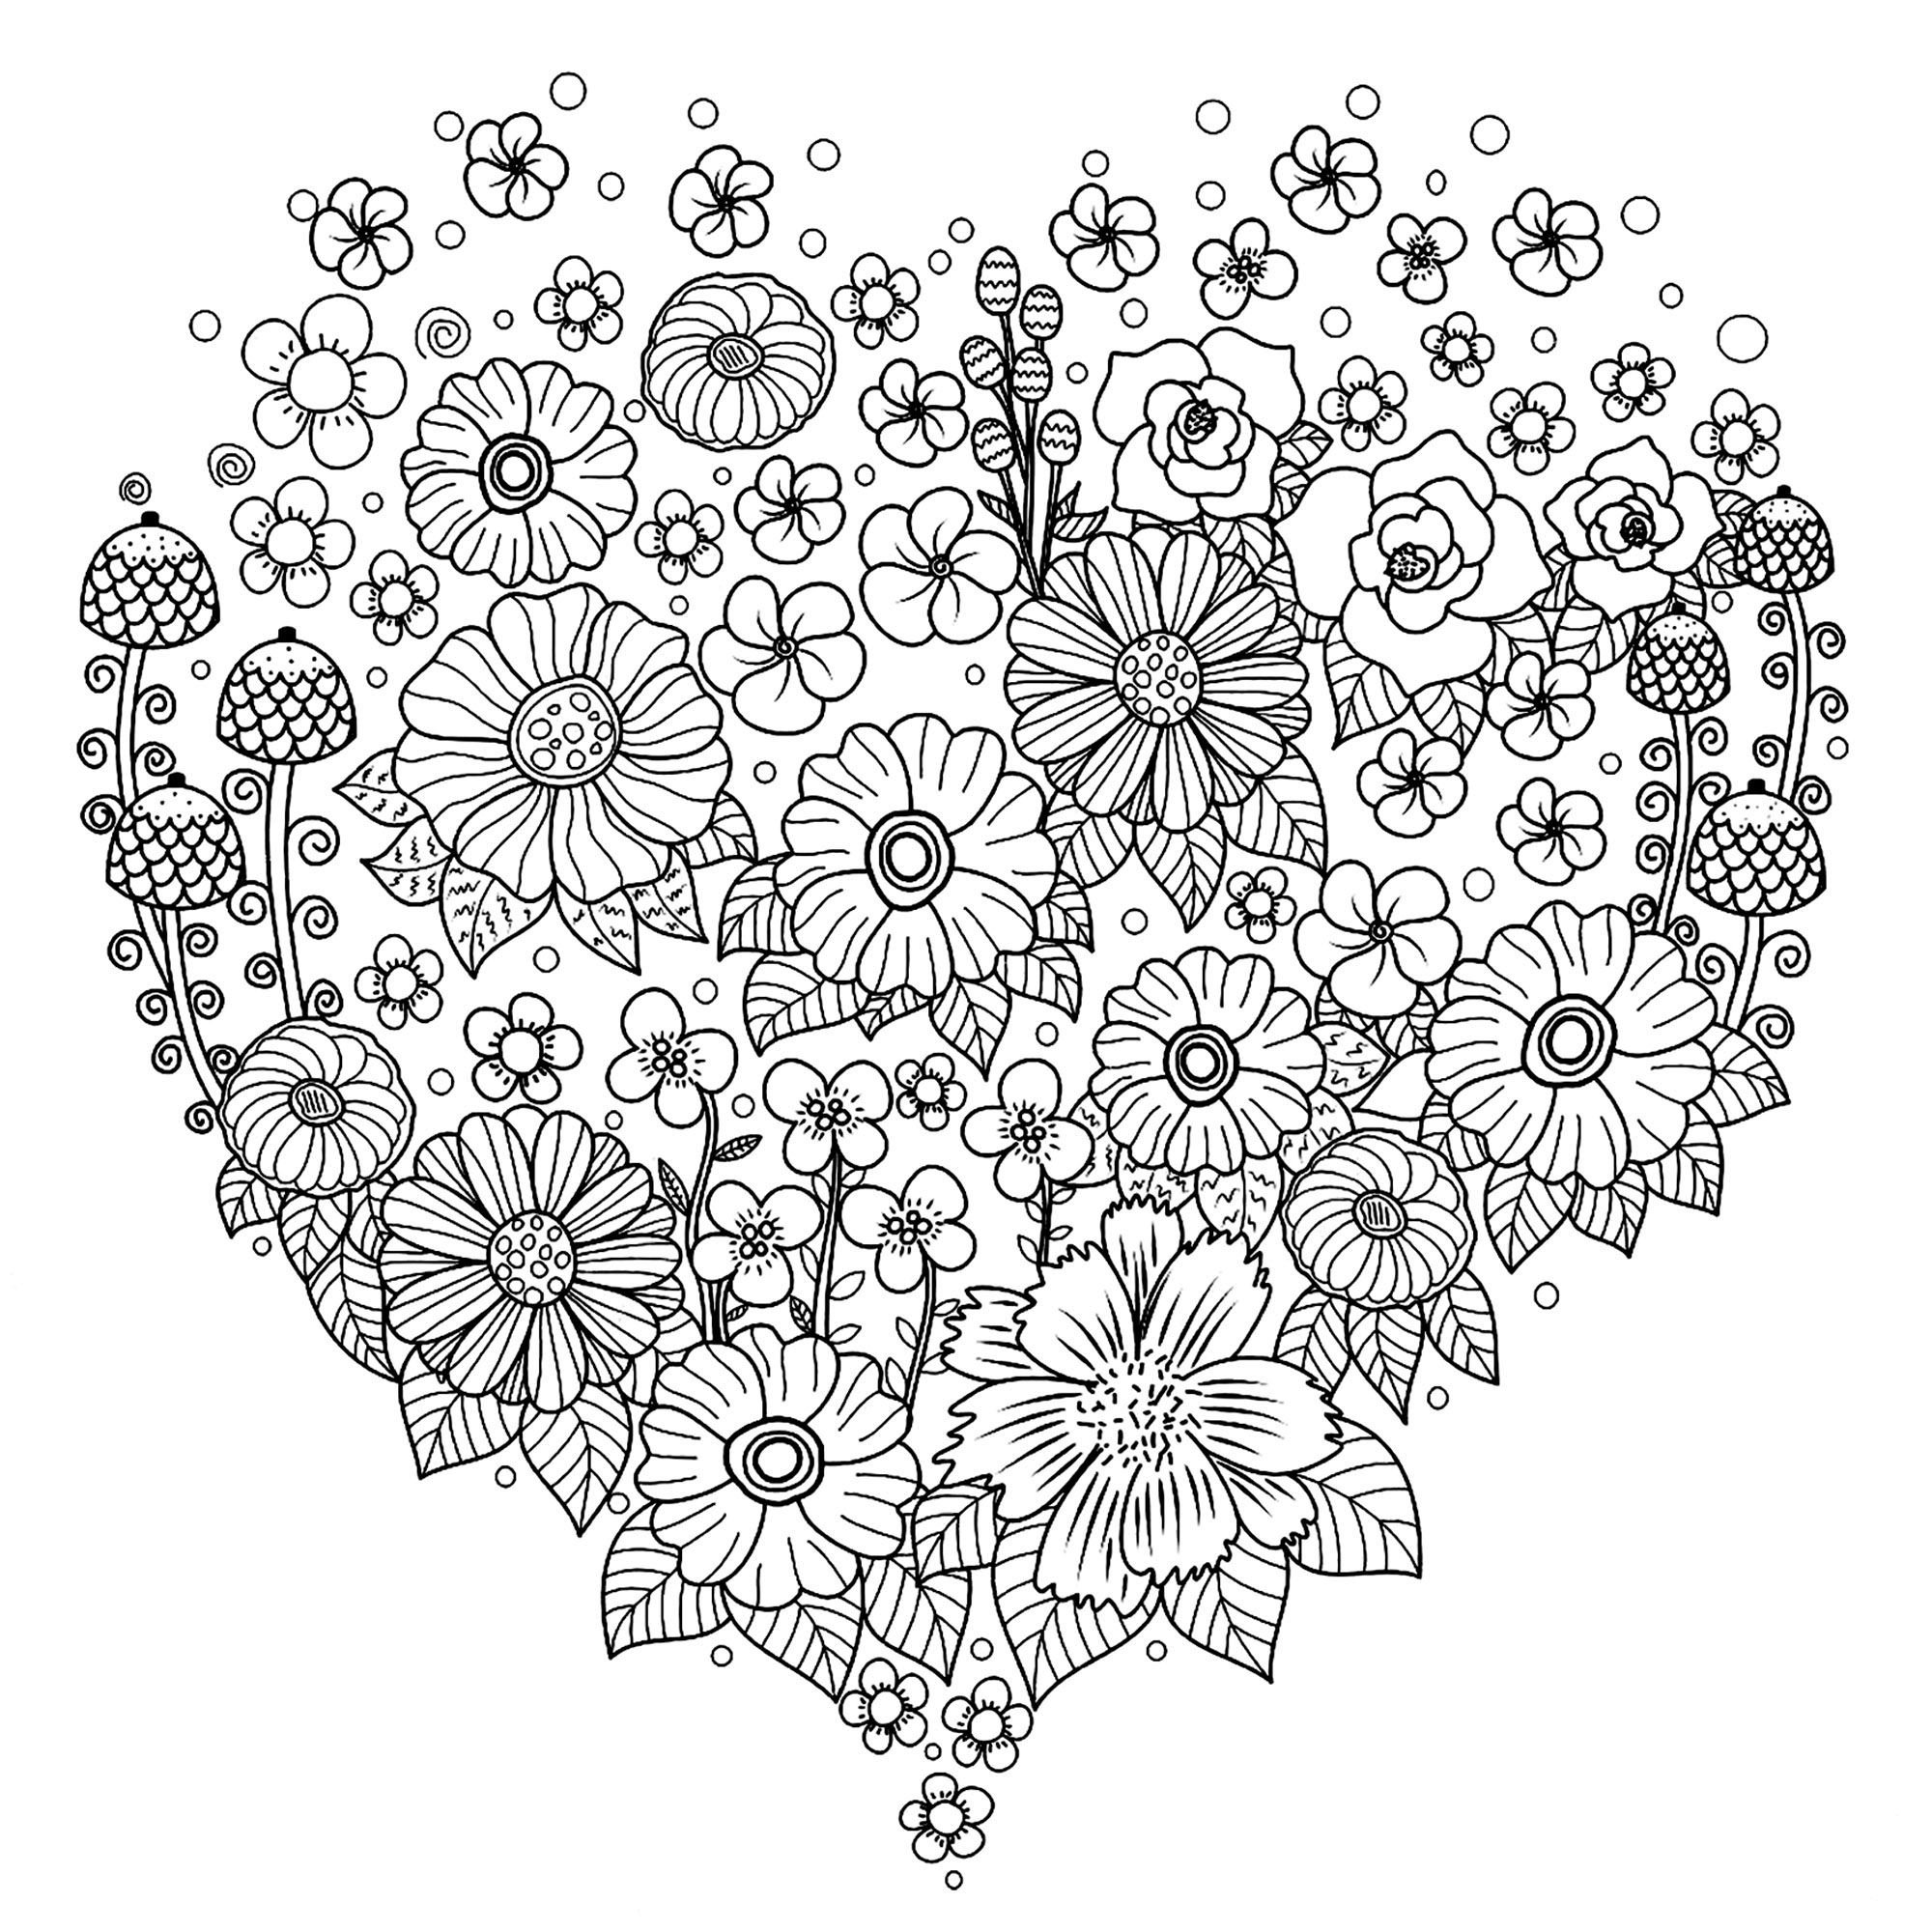 Color this beautiful flowers in this heart, Artist : Nitiya Chuahmon   Source : 123rf